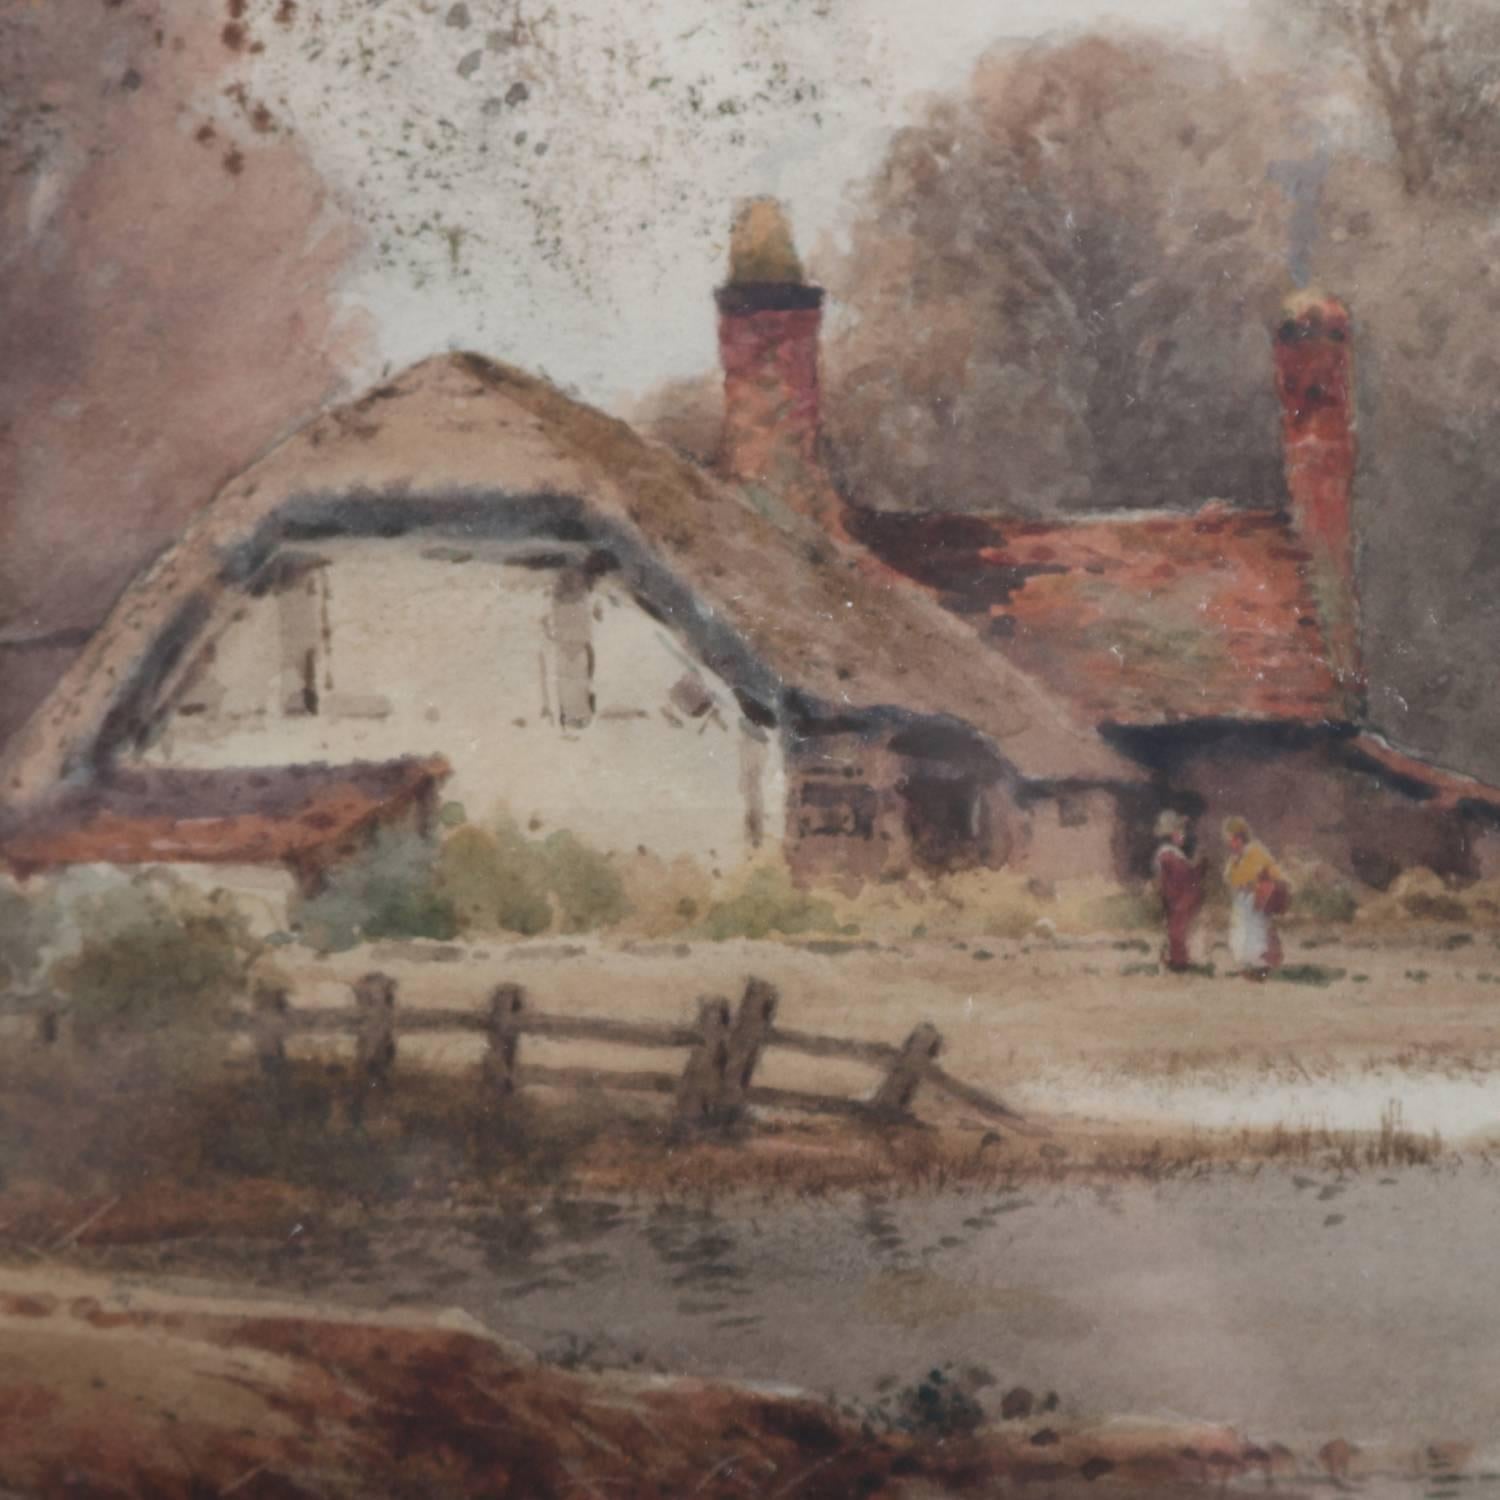 Antique English landscape watercolor painting by Creswick Boydell, R.C.A. (Royal Academy of Art), with figures and cottage near river, reminiscent of Hudson River School, circa 1903

Measures: fr: 23